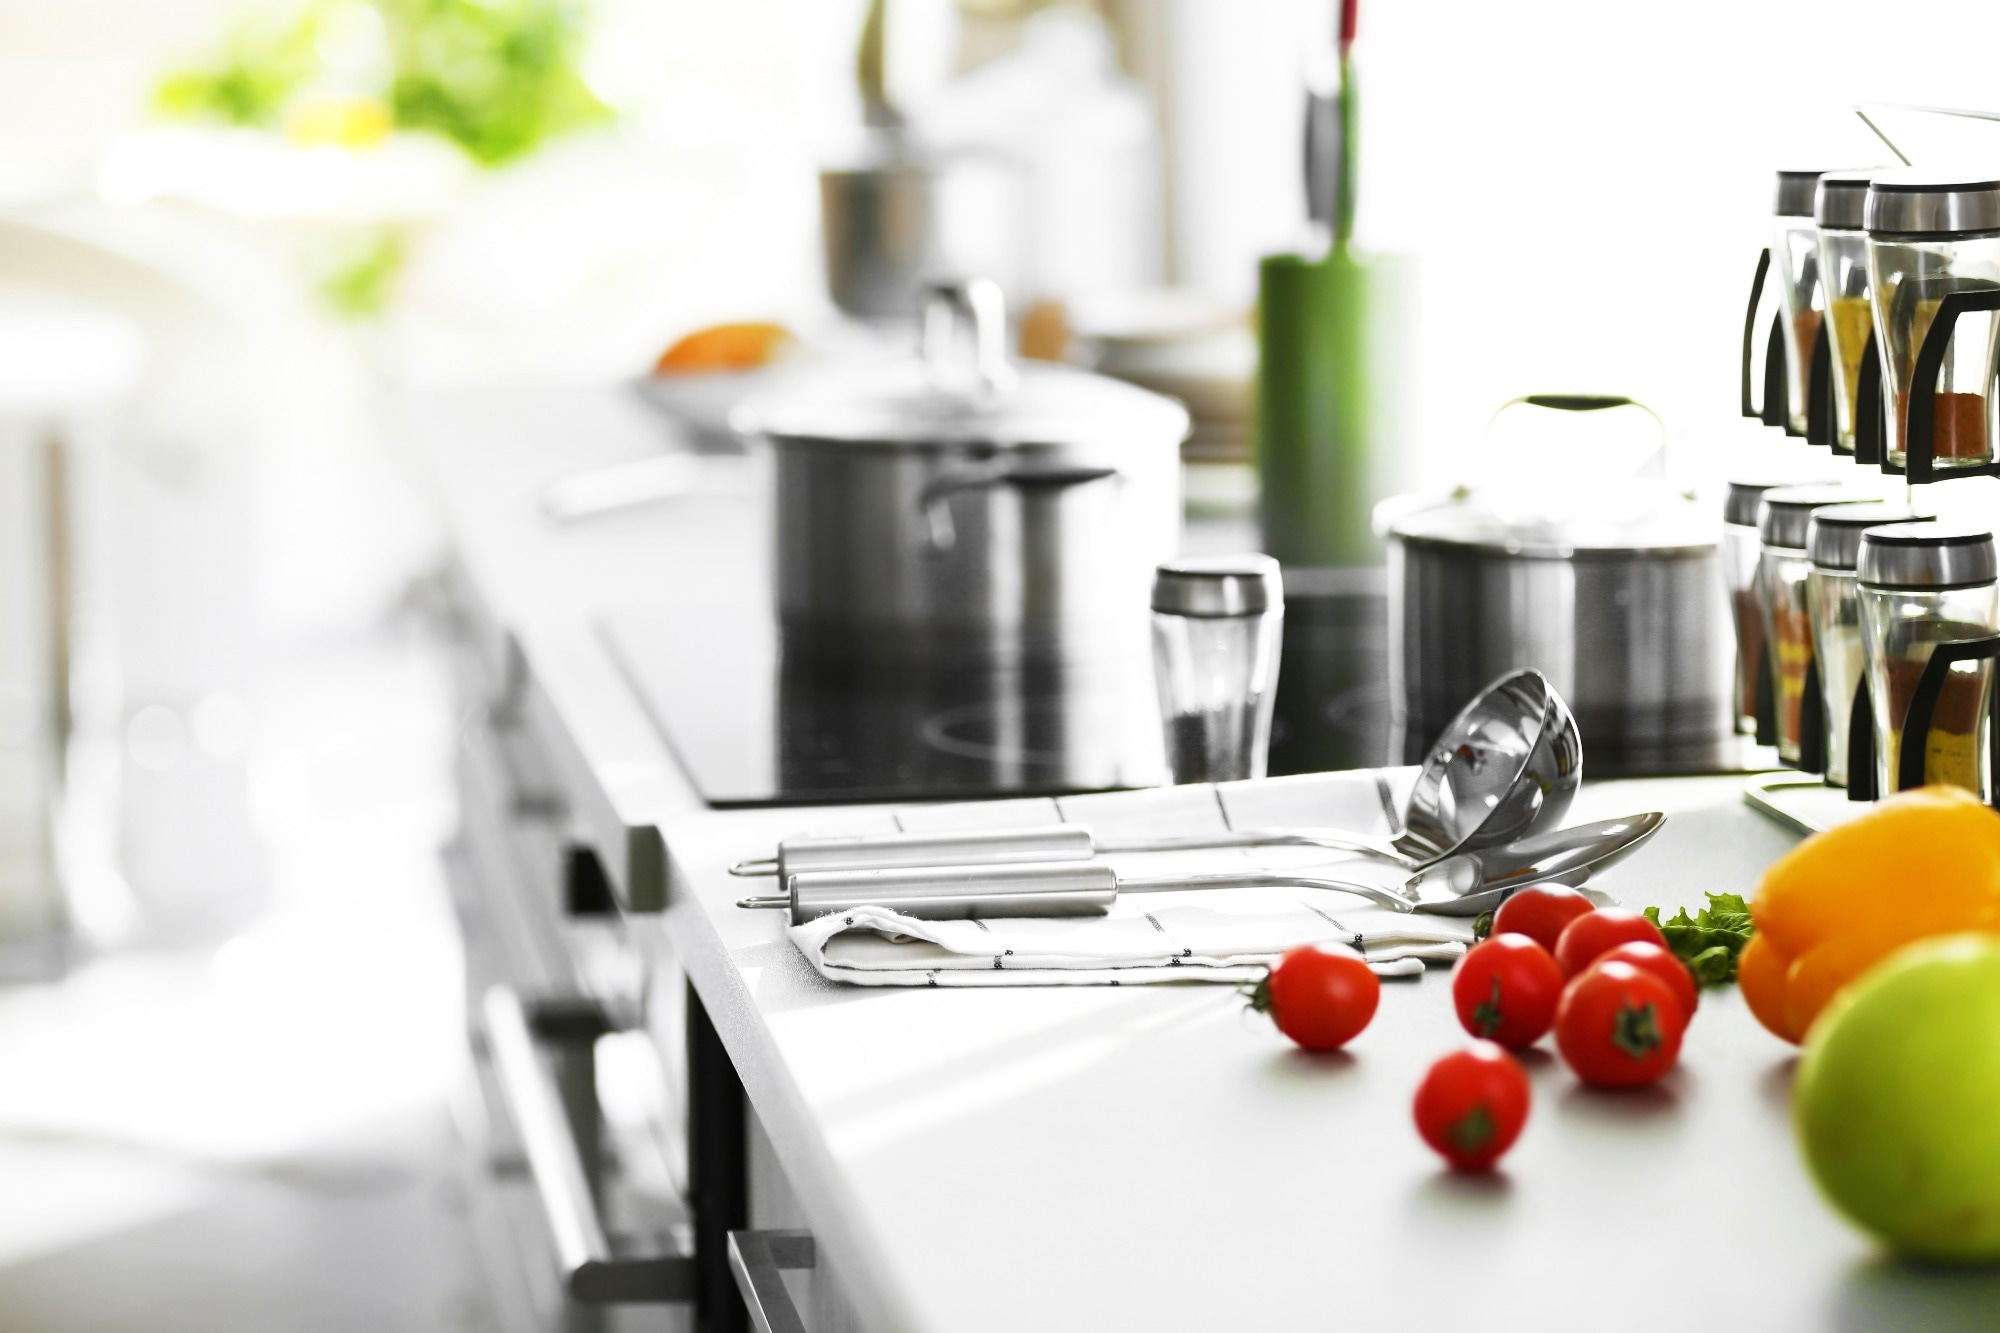 Study: Mapping the Kitchen Microbiota in Five European Countries Reveals a Set of Core Bacteria across Countries, Kitchen Surfaces, and Cleaning Utensils. Image Credit: Africa Studio / Shutterstock.com